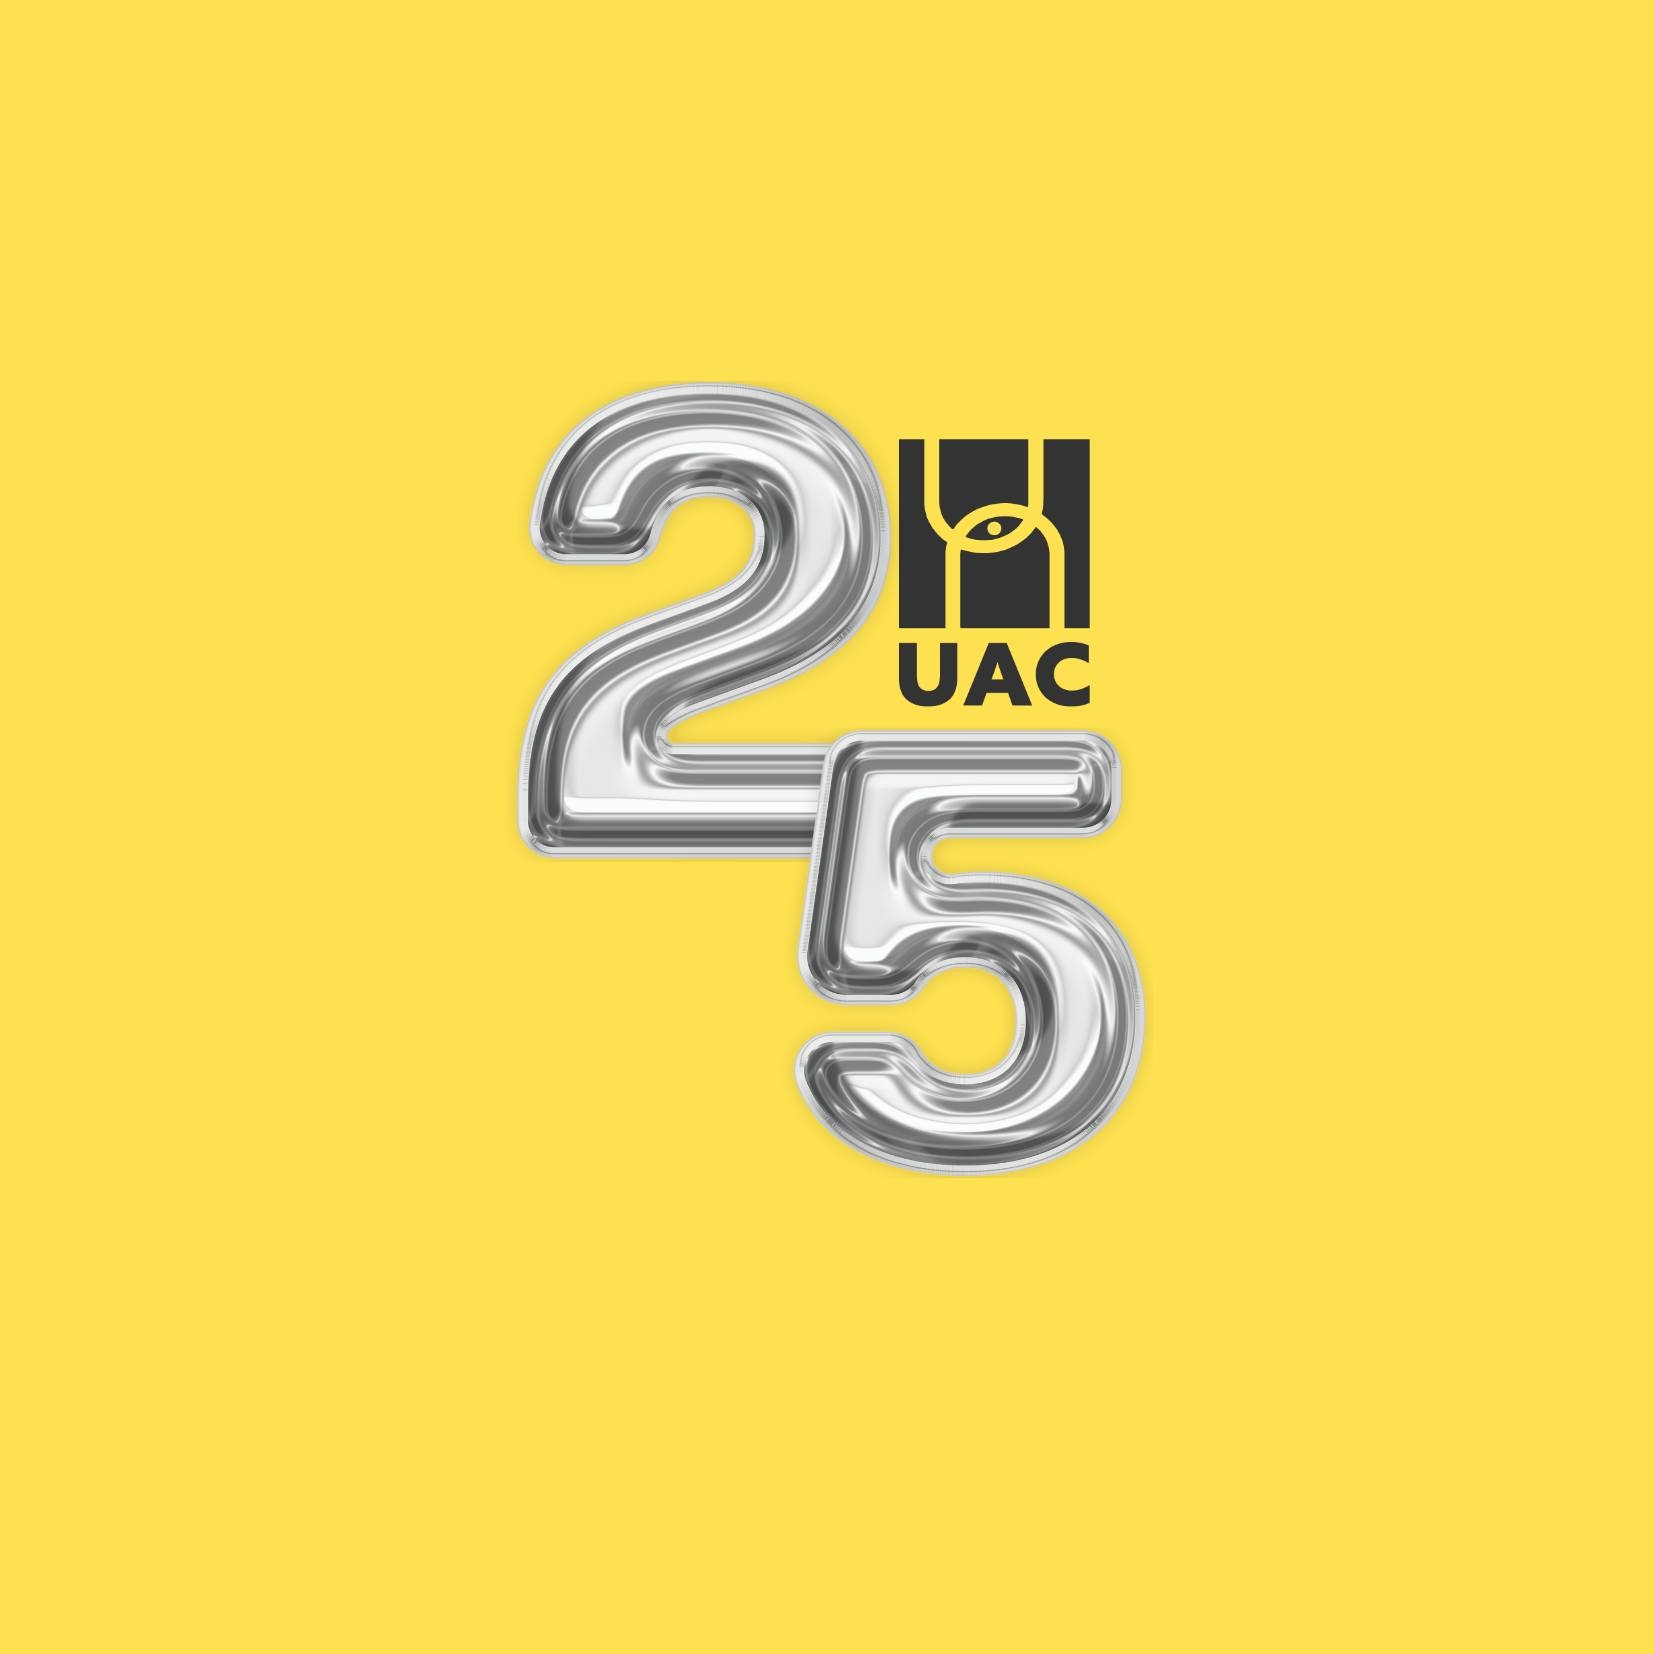 The 25th anniversary logo for the University of California, Berkeley created by the Urban Art Commission.